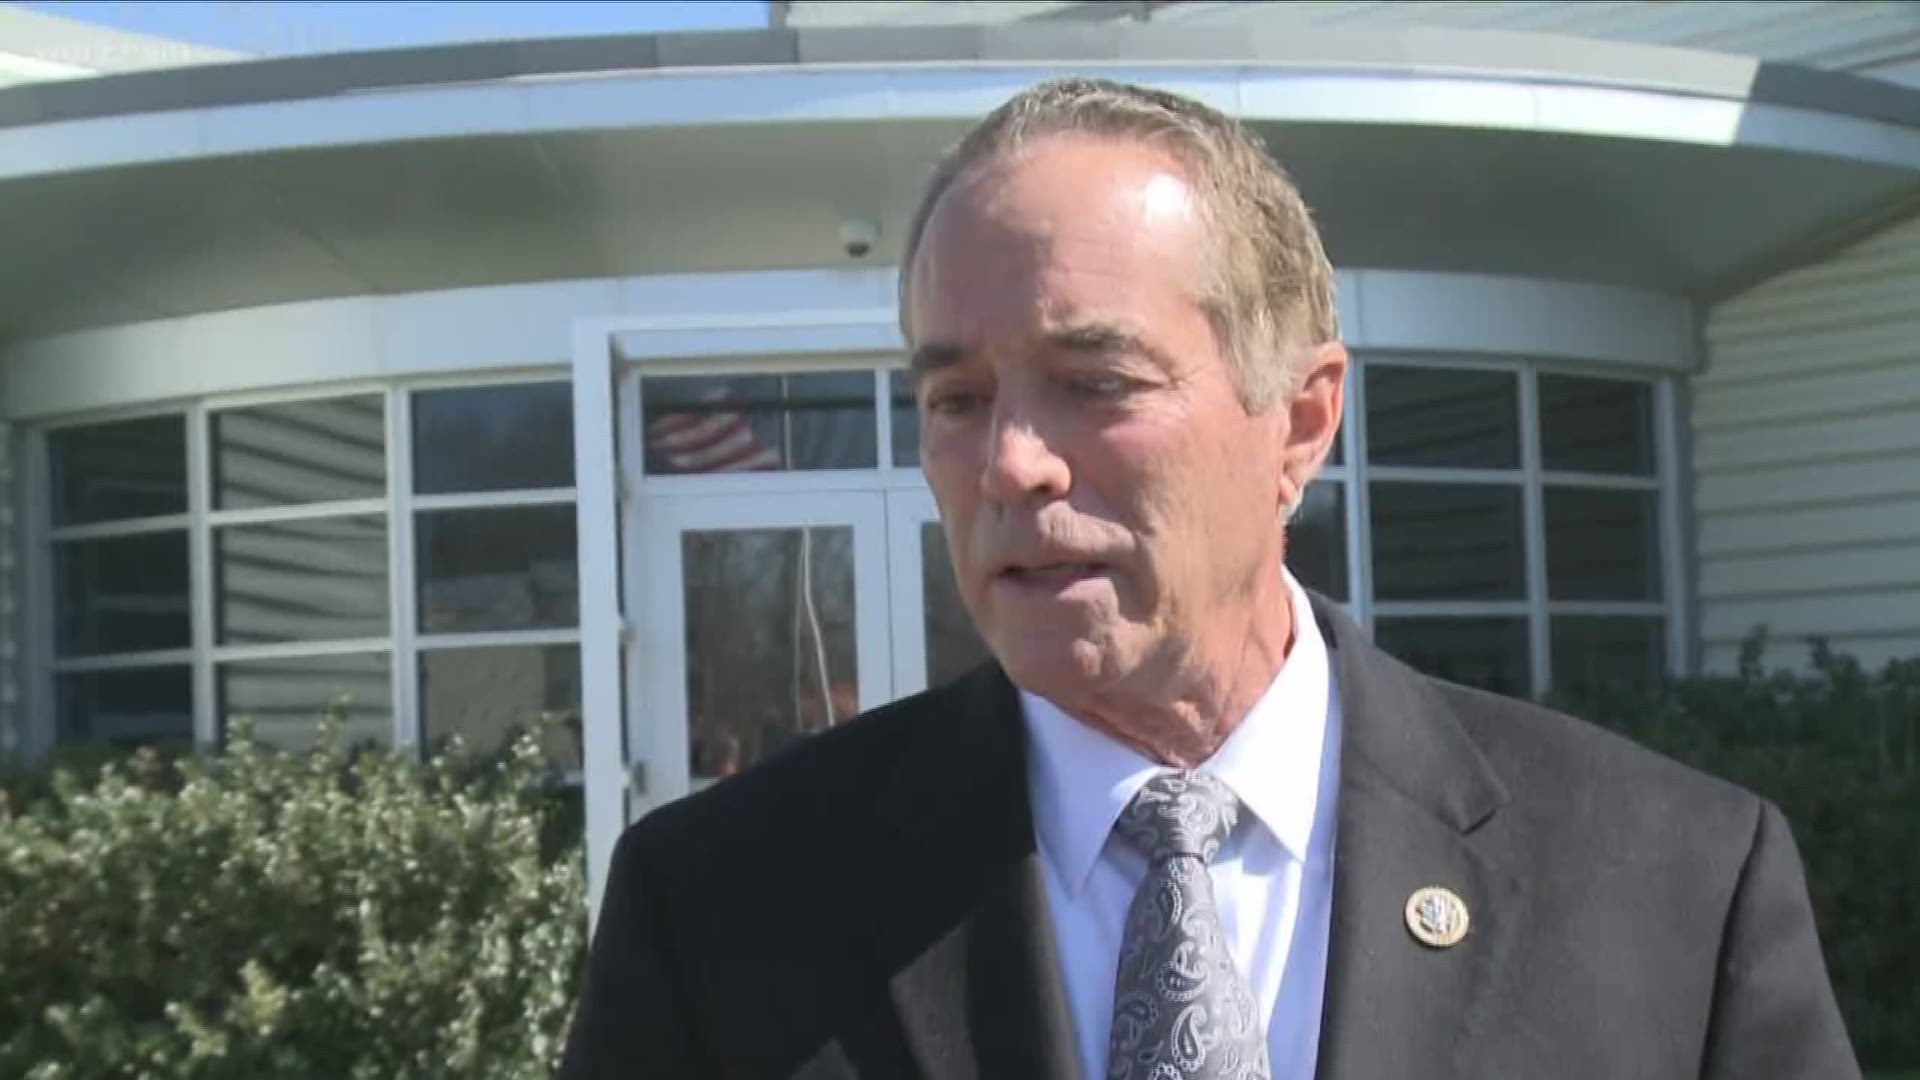 Congressman Chris Collins speaks about the former Republican who petitioned for to run on the Green Party line and then withdrew.